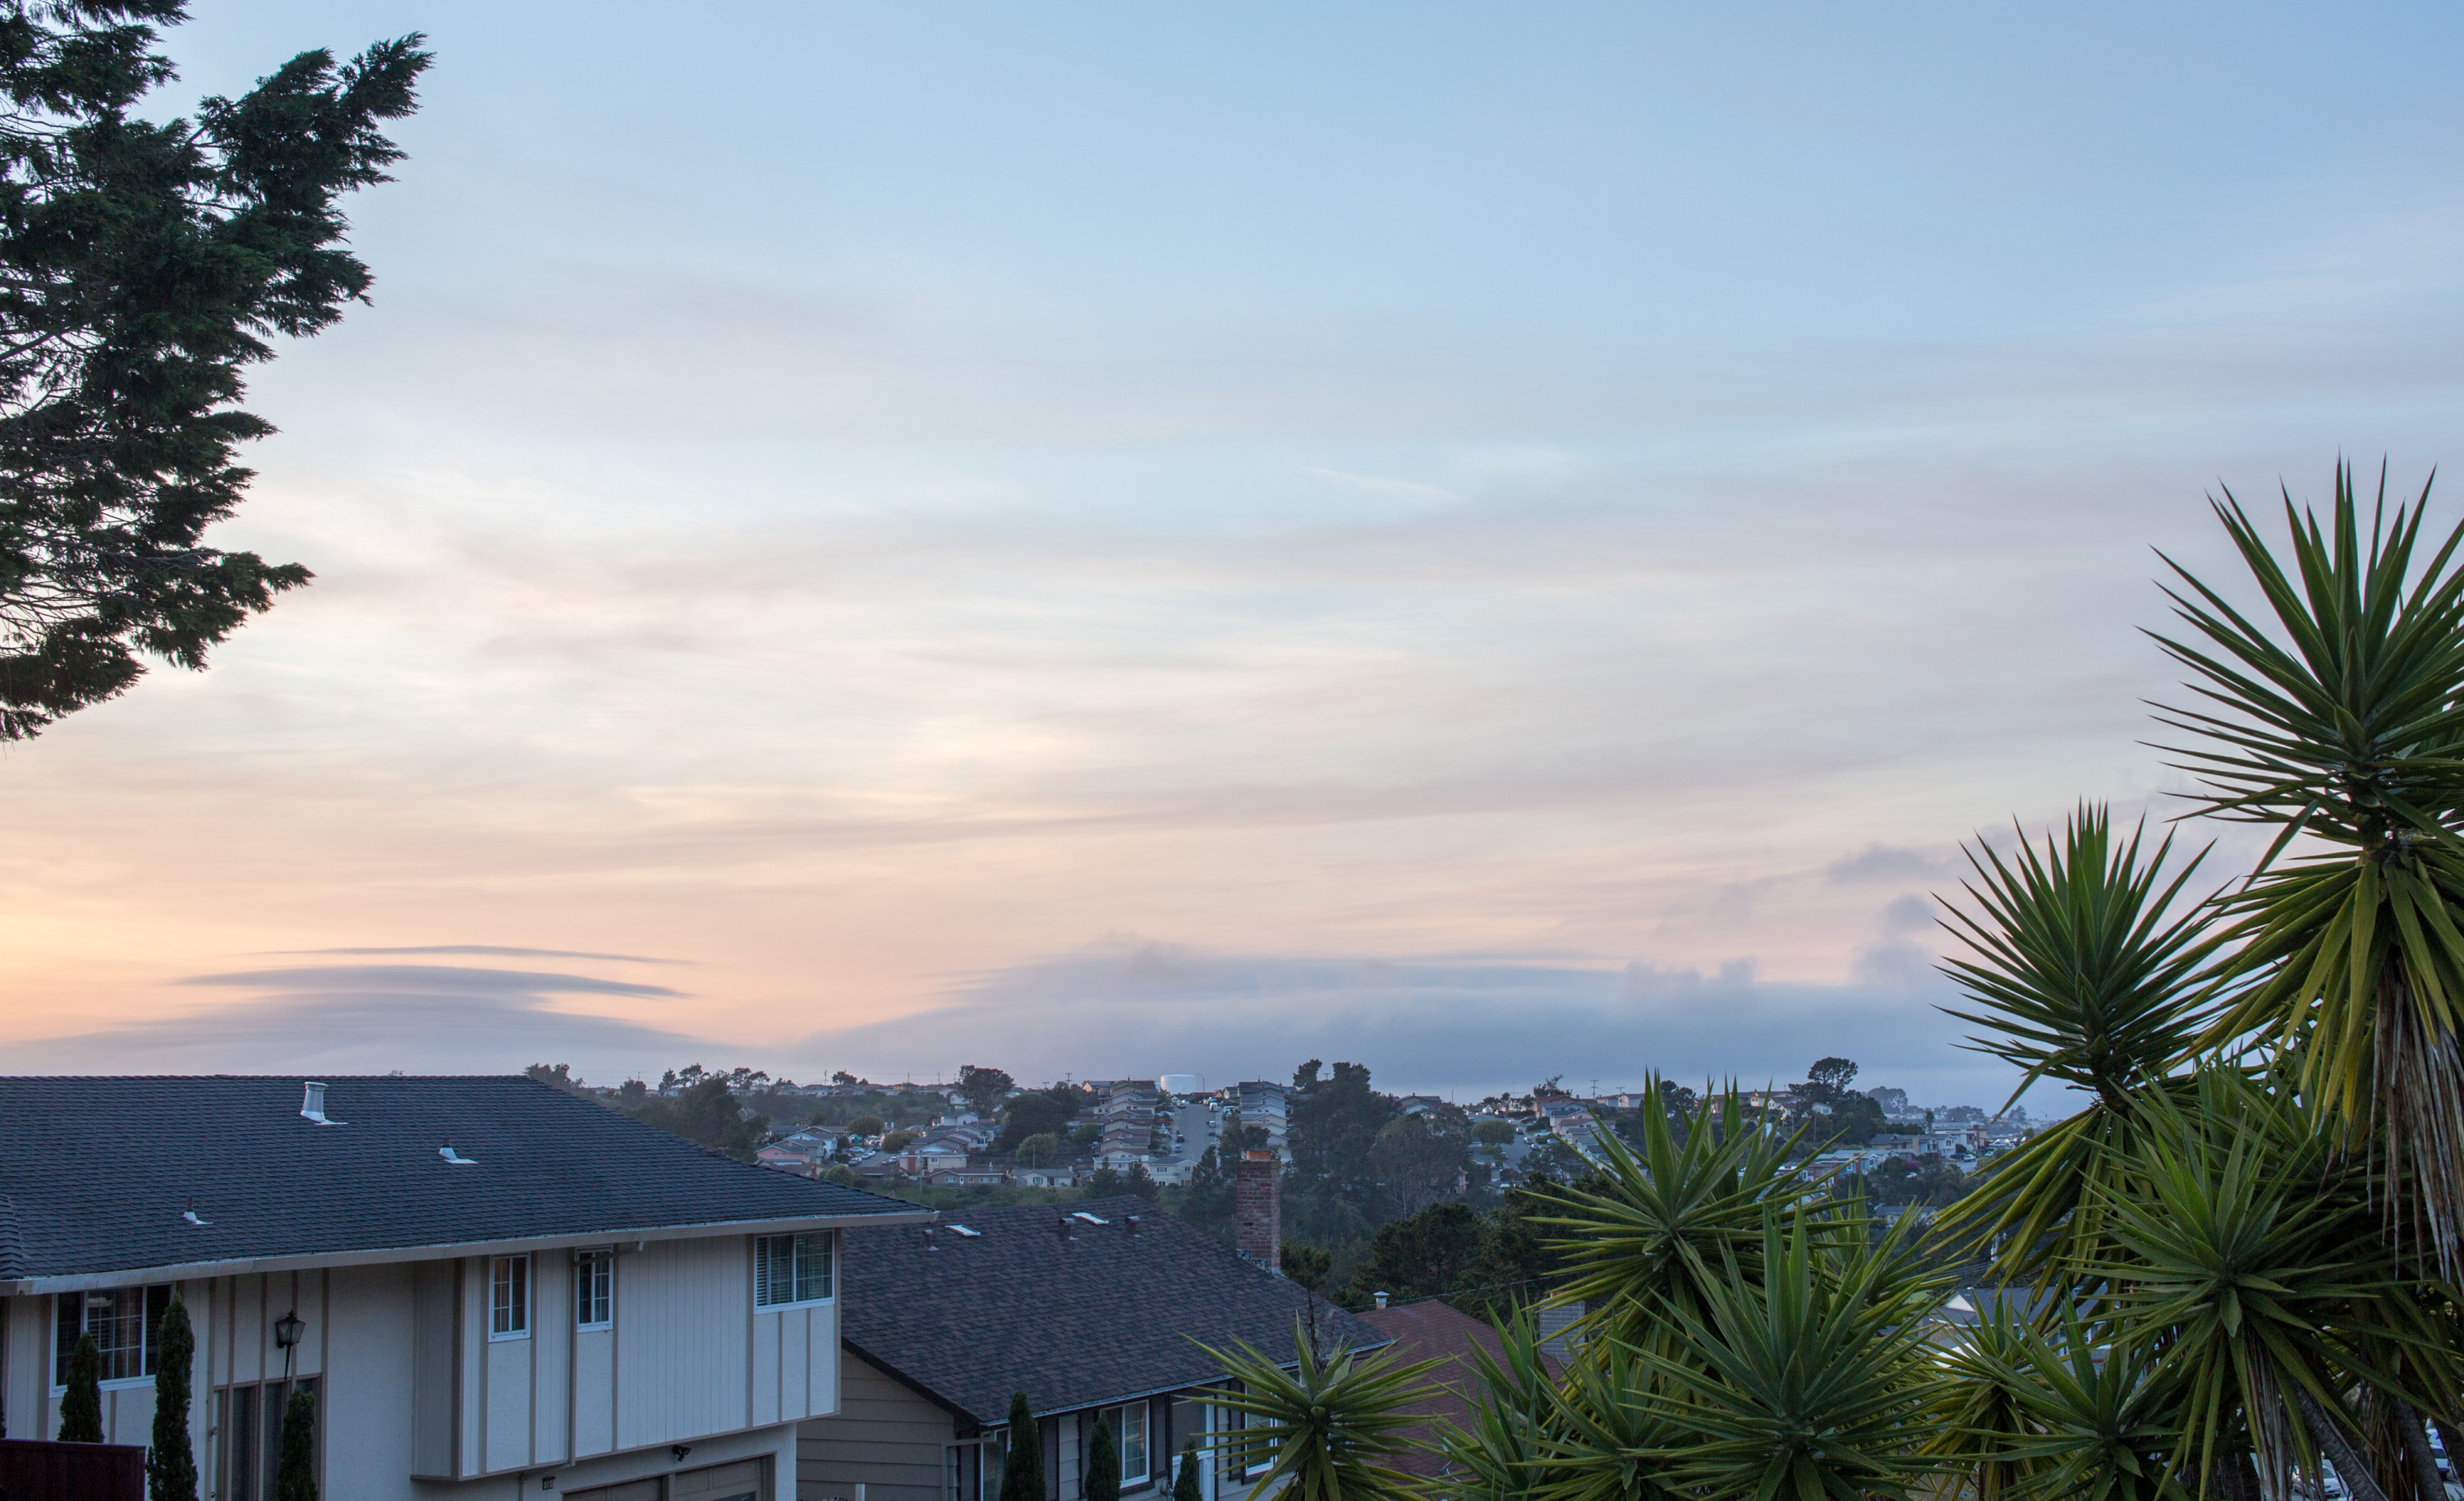 A sunset view of San Bruno